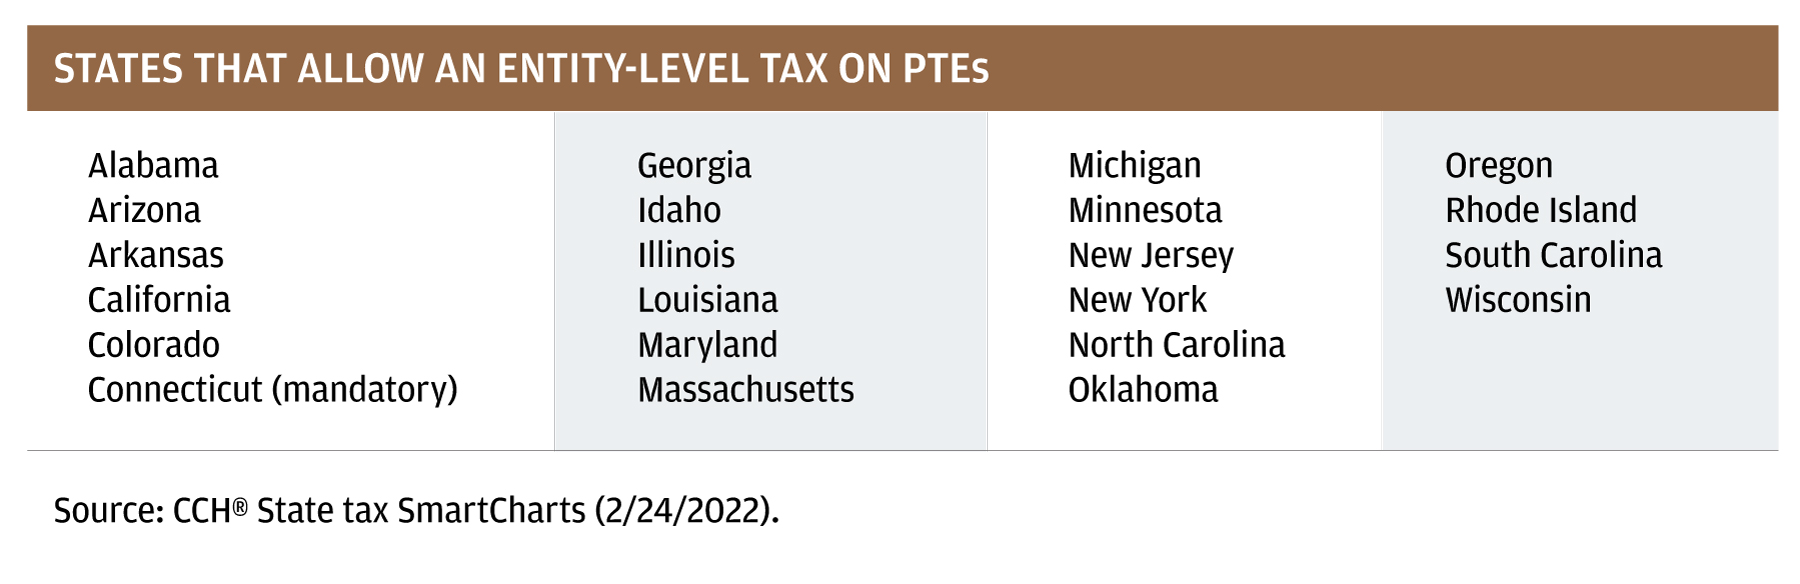 This table shows a list of U.S. states that have passed laws offering an entity-level tax on PTEs, as of Feb 24, 2022.